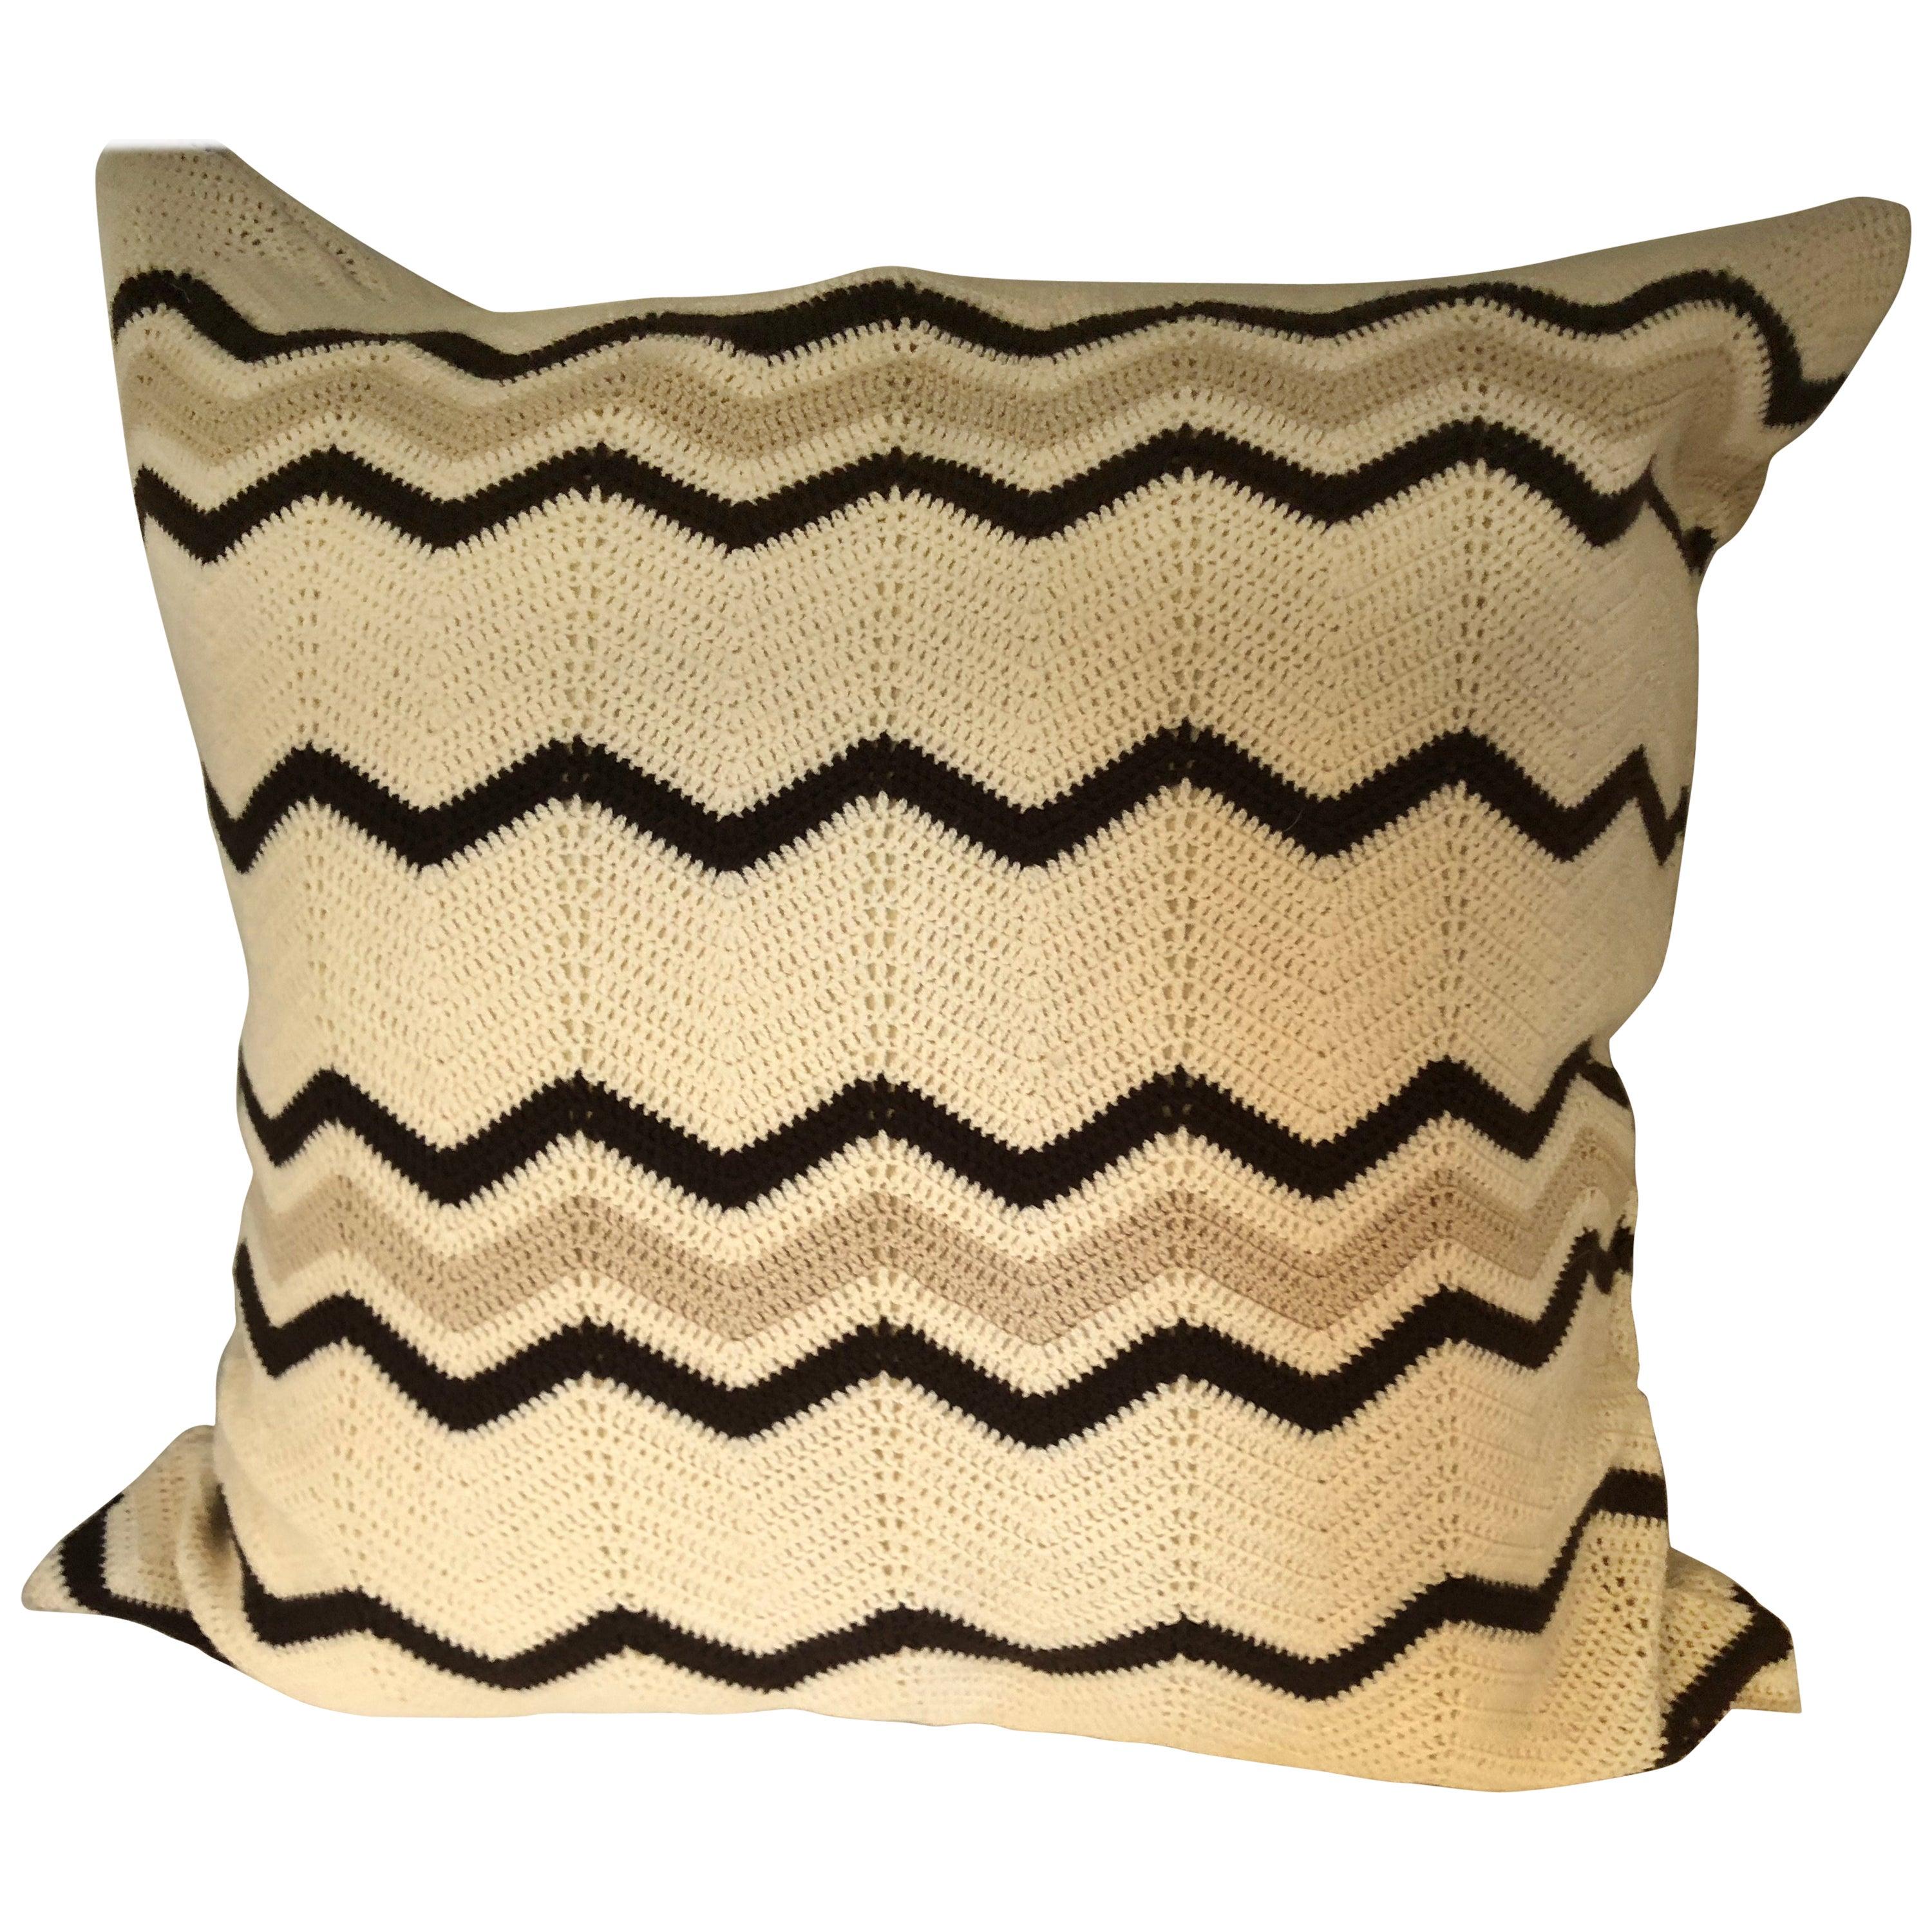  "Anzio" Wool Pillow by Le Lampade For Sale